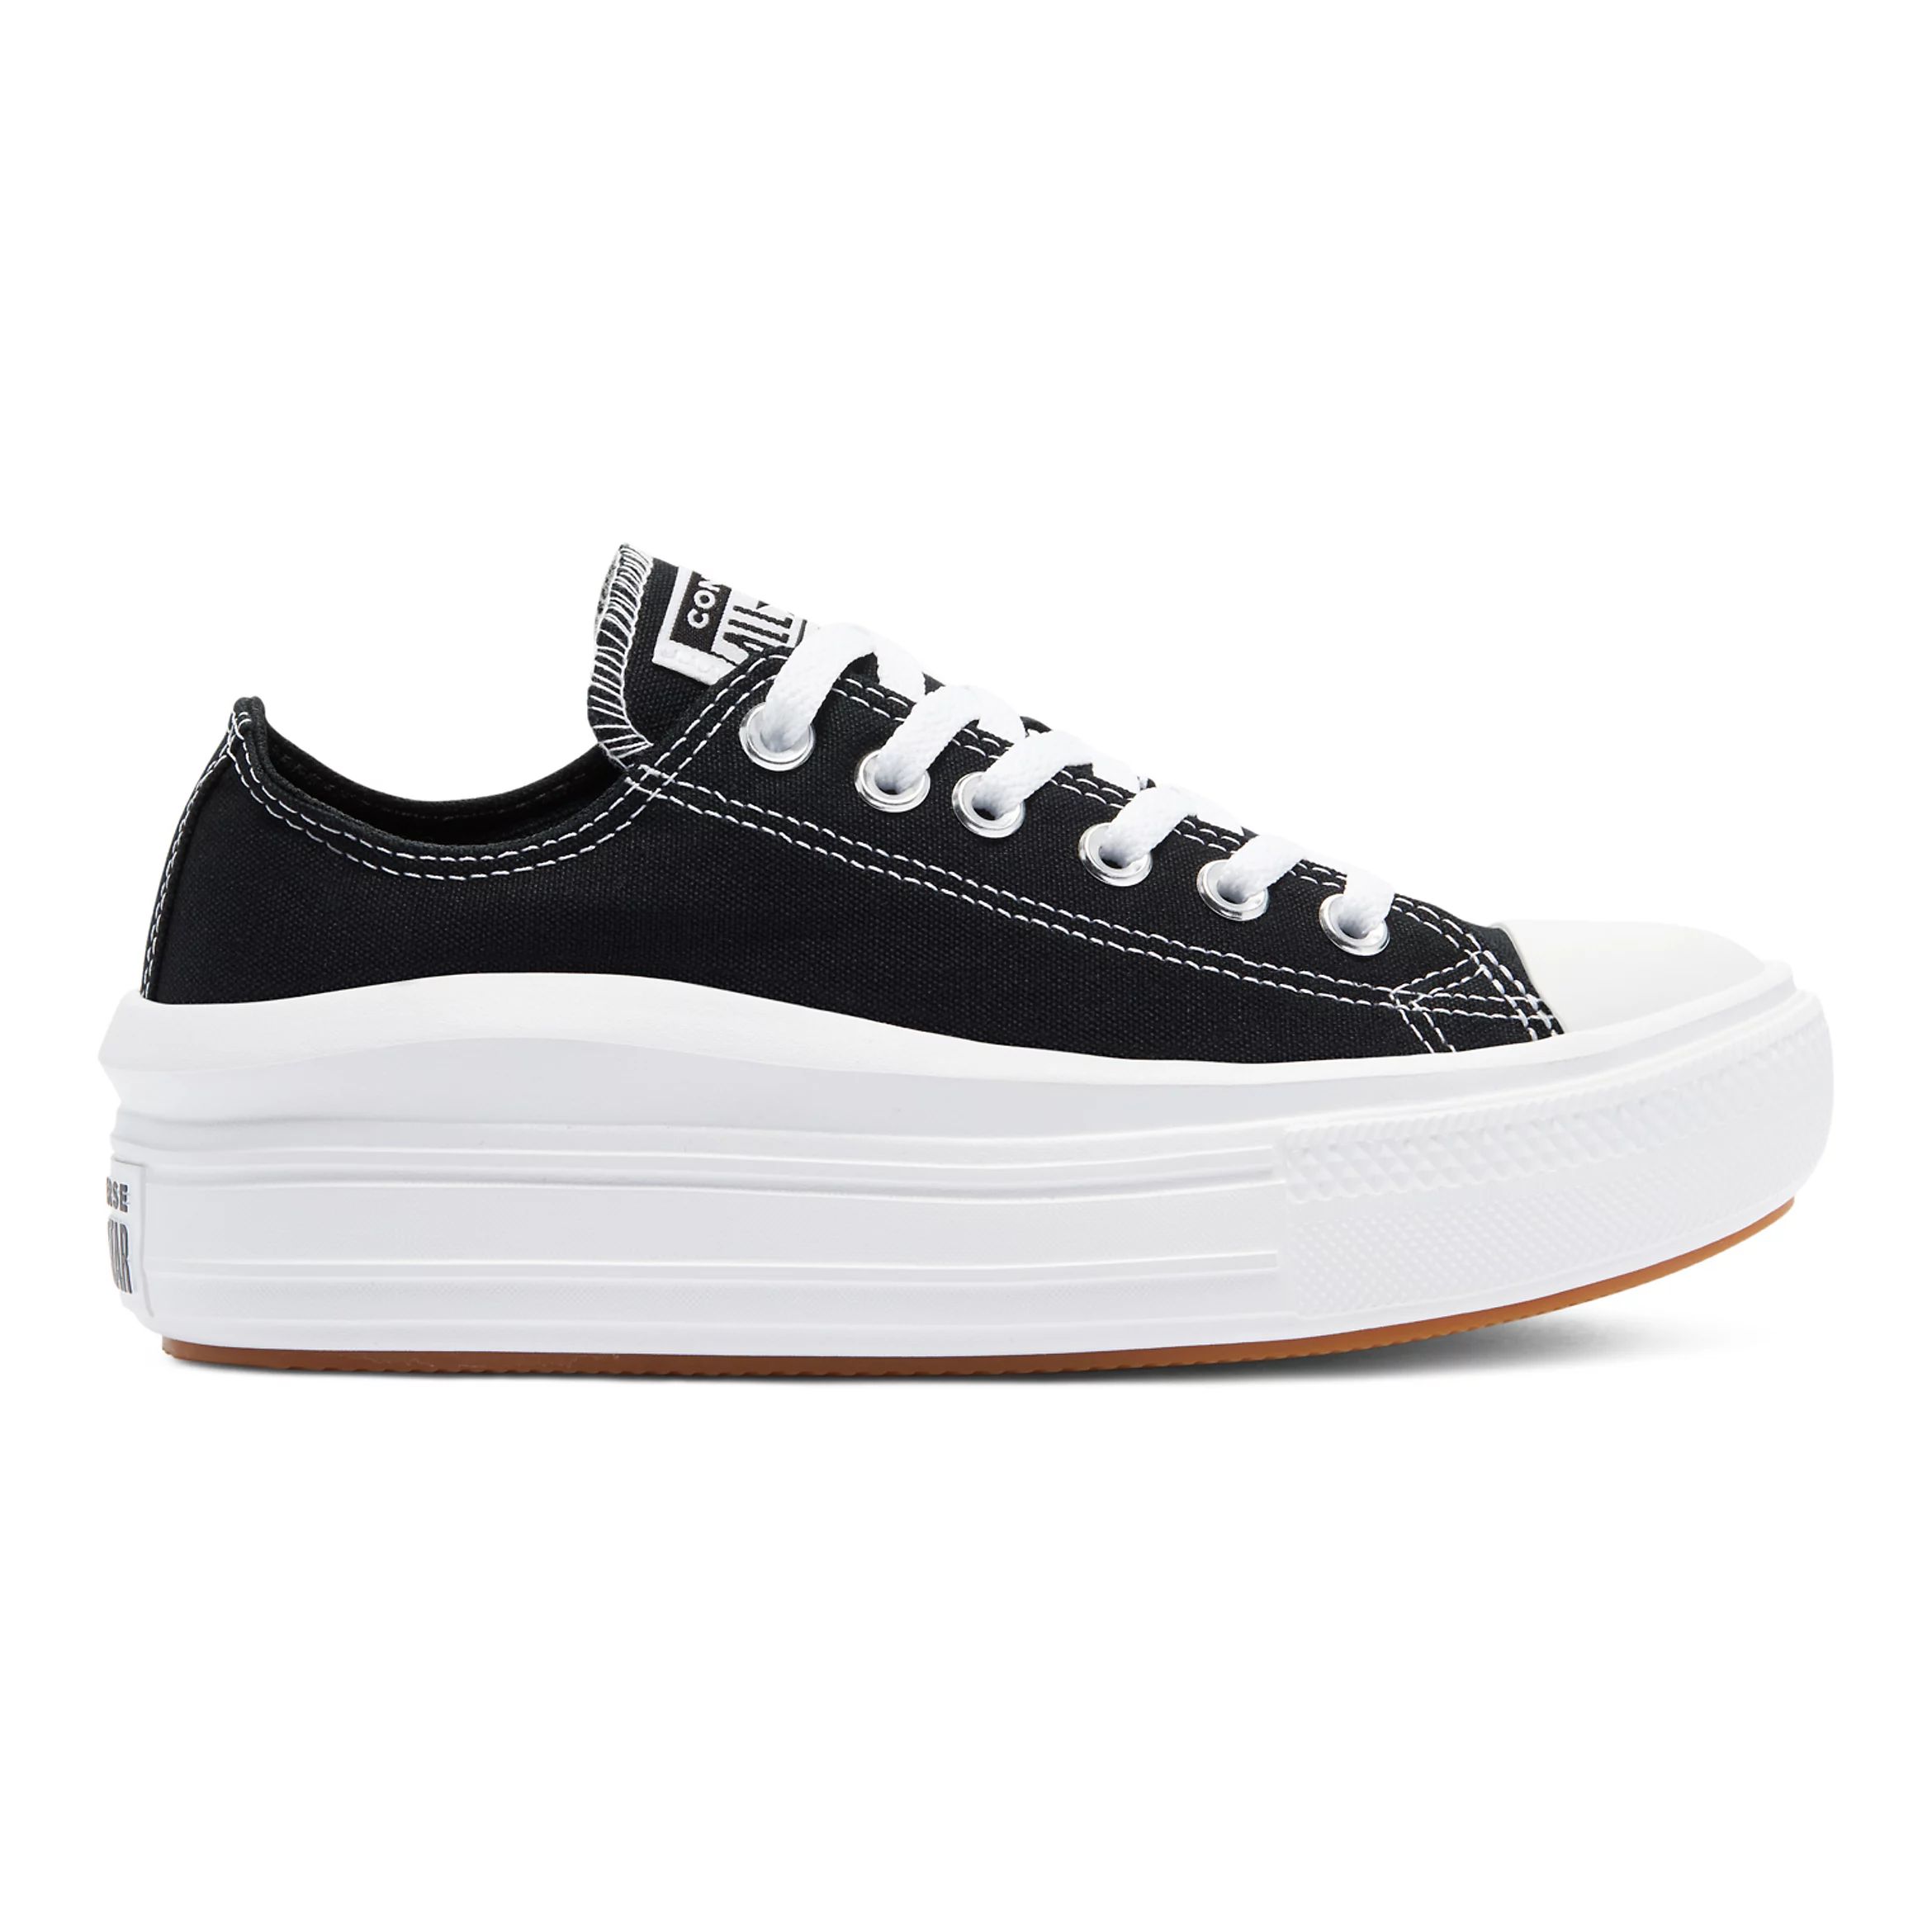 Converse Chuck Taylor All Star Move Women's Platform Sneakers | Kohl's